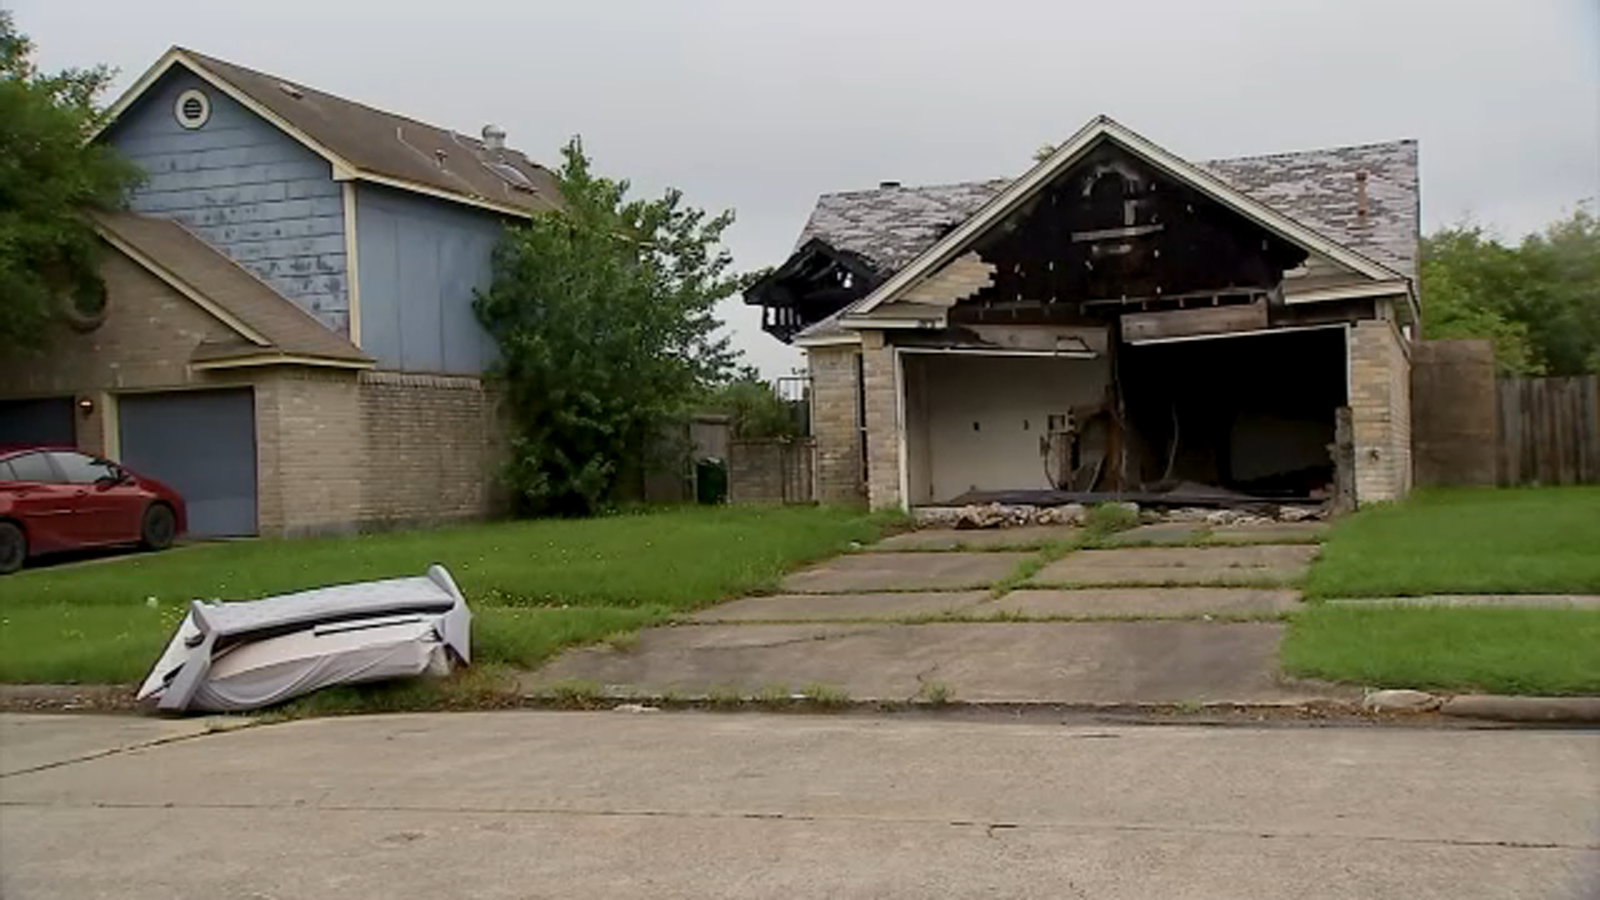 Houston homes taken over by squatters leave homeowners and neighbors frustrated by legalities